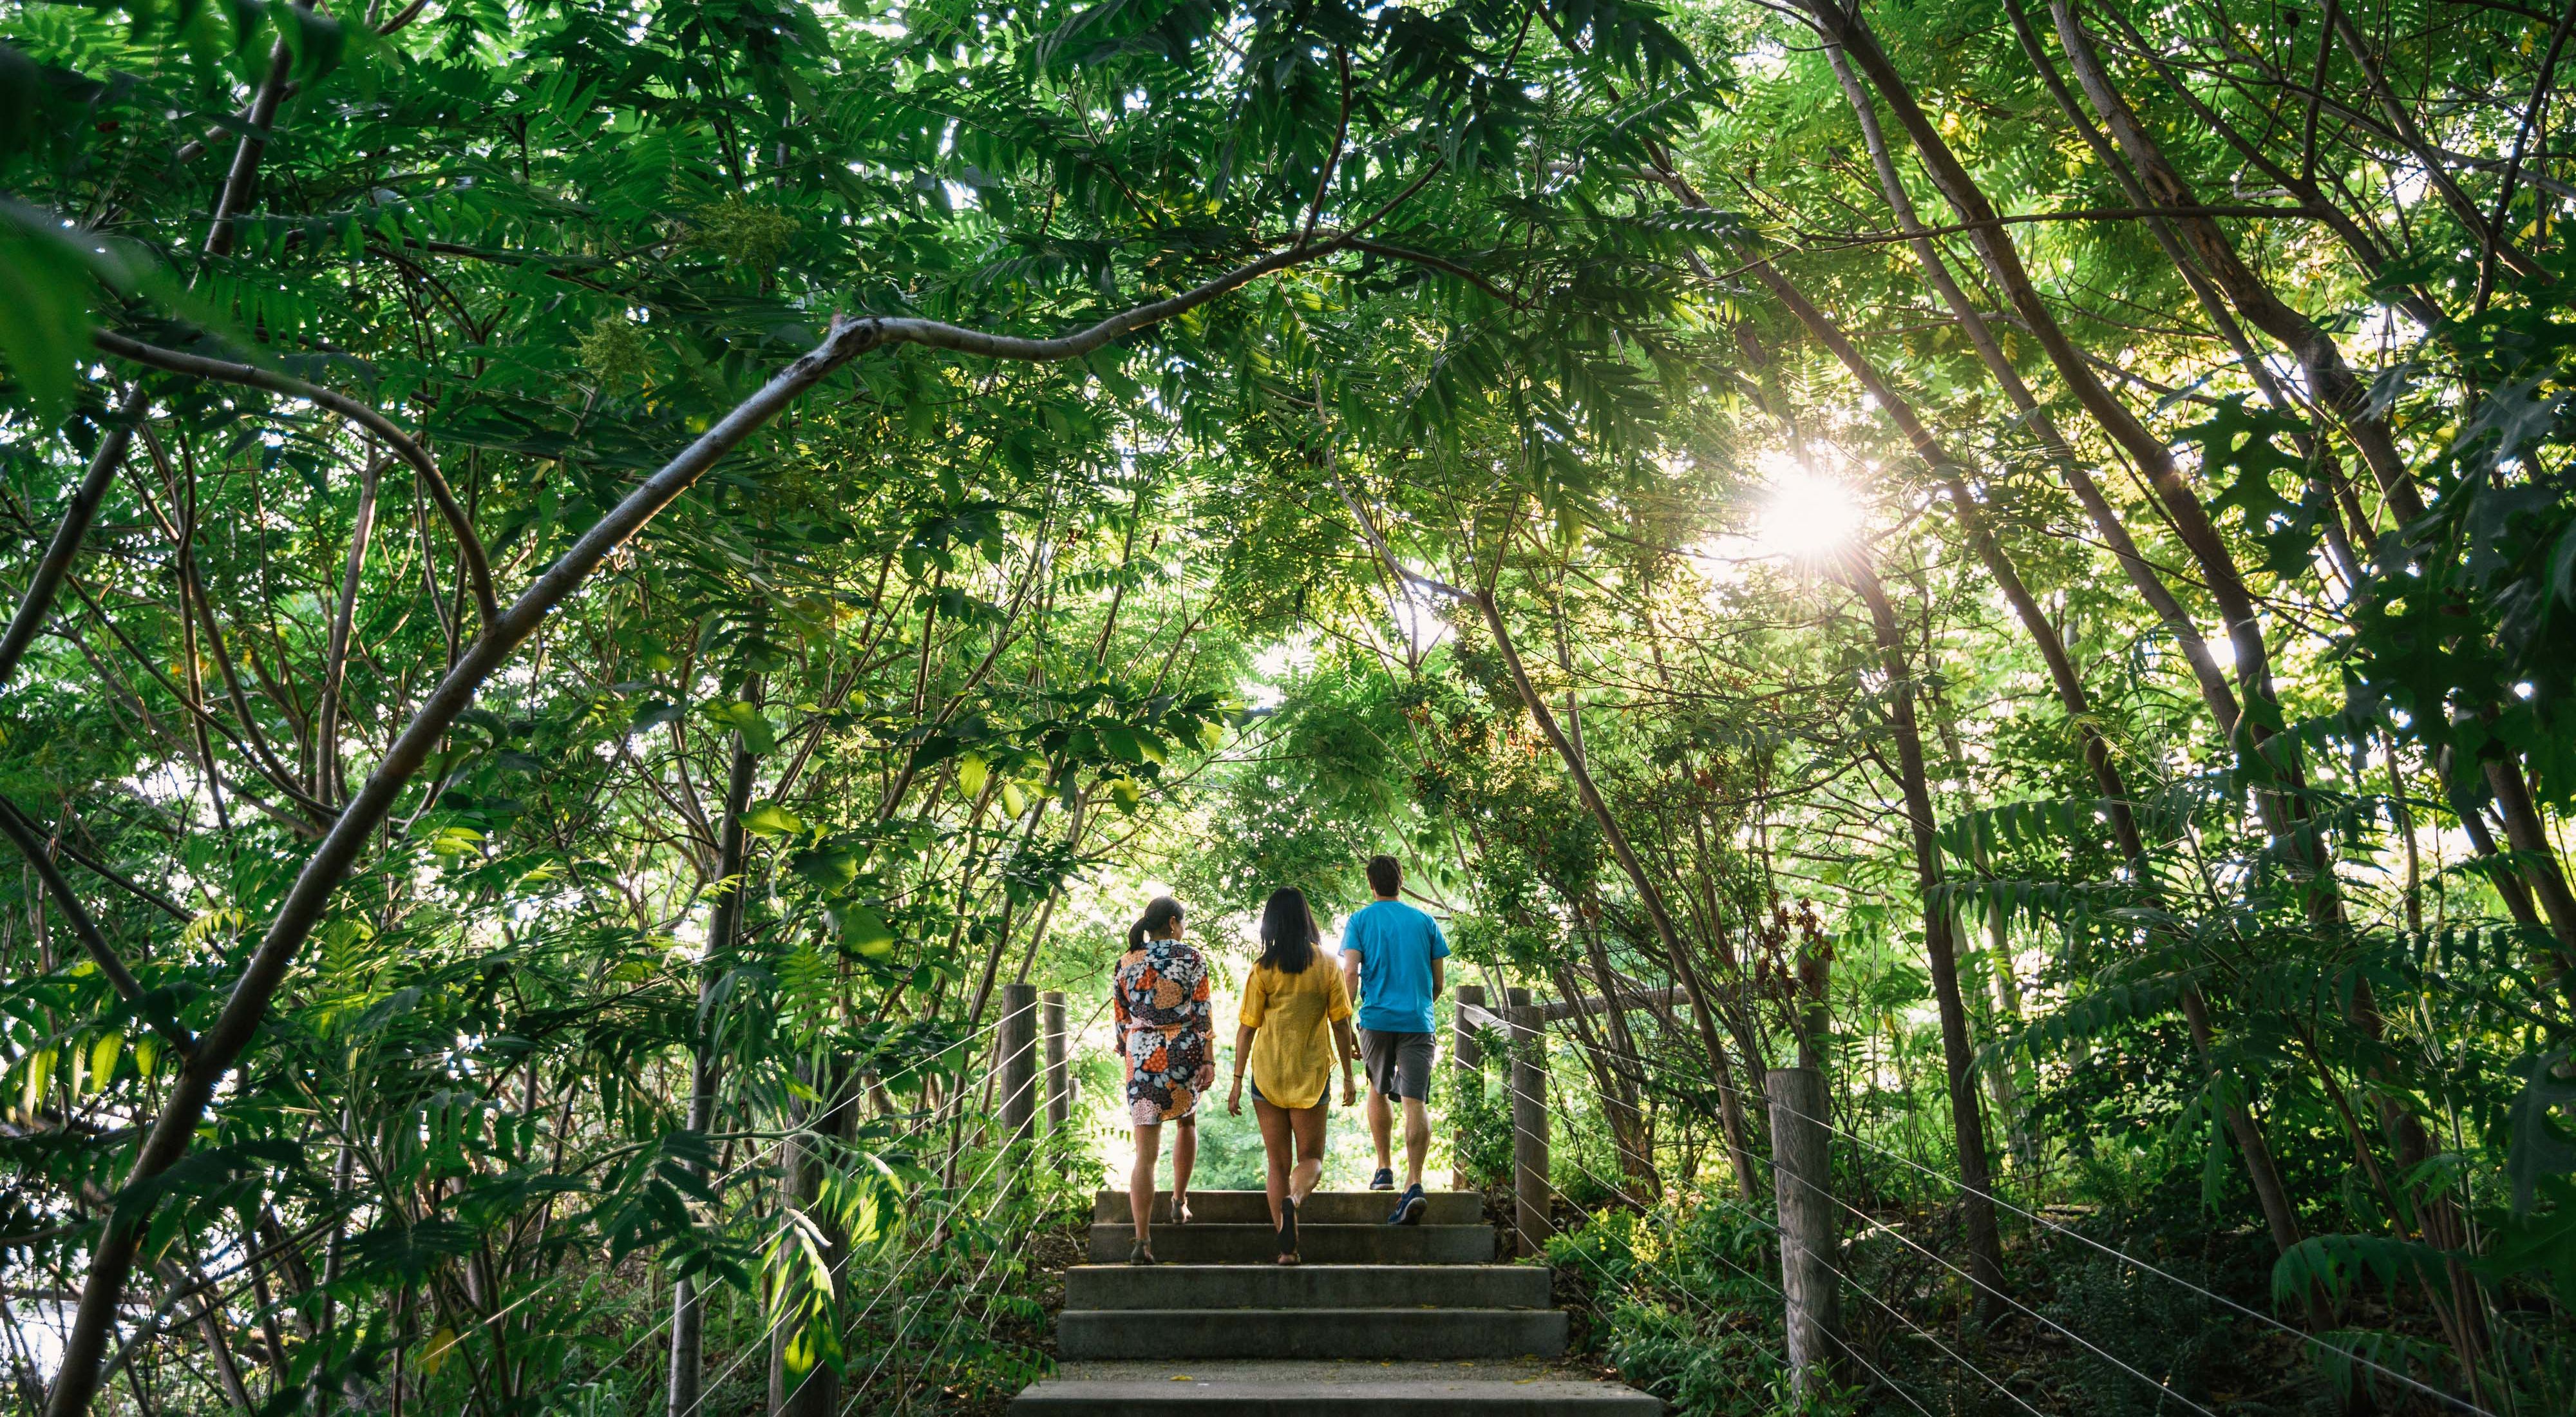 Three people walk up stairs on a path through a forest in a park.